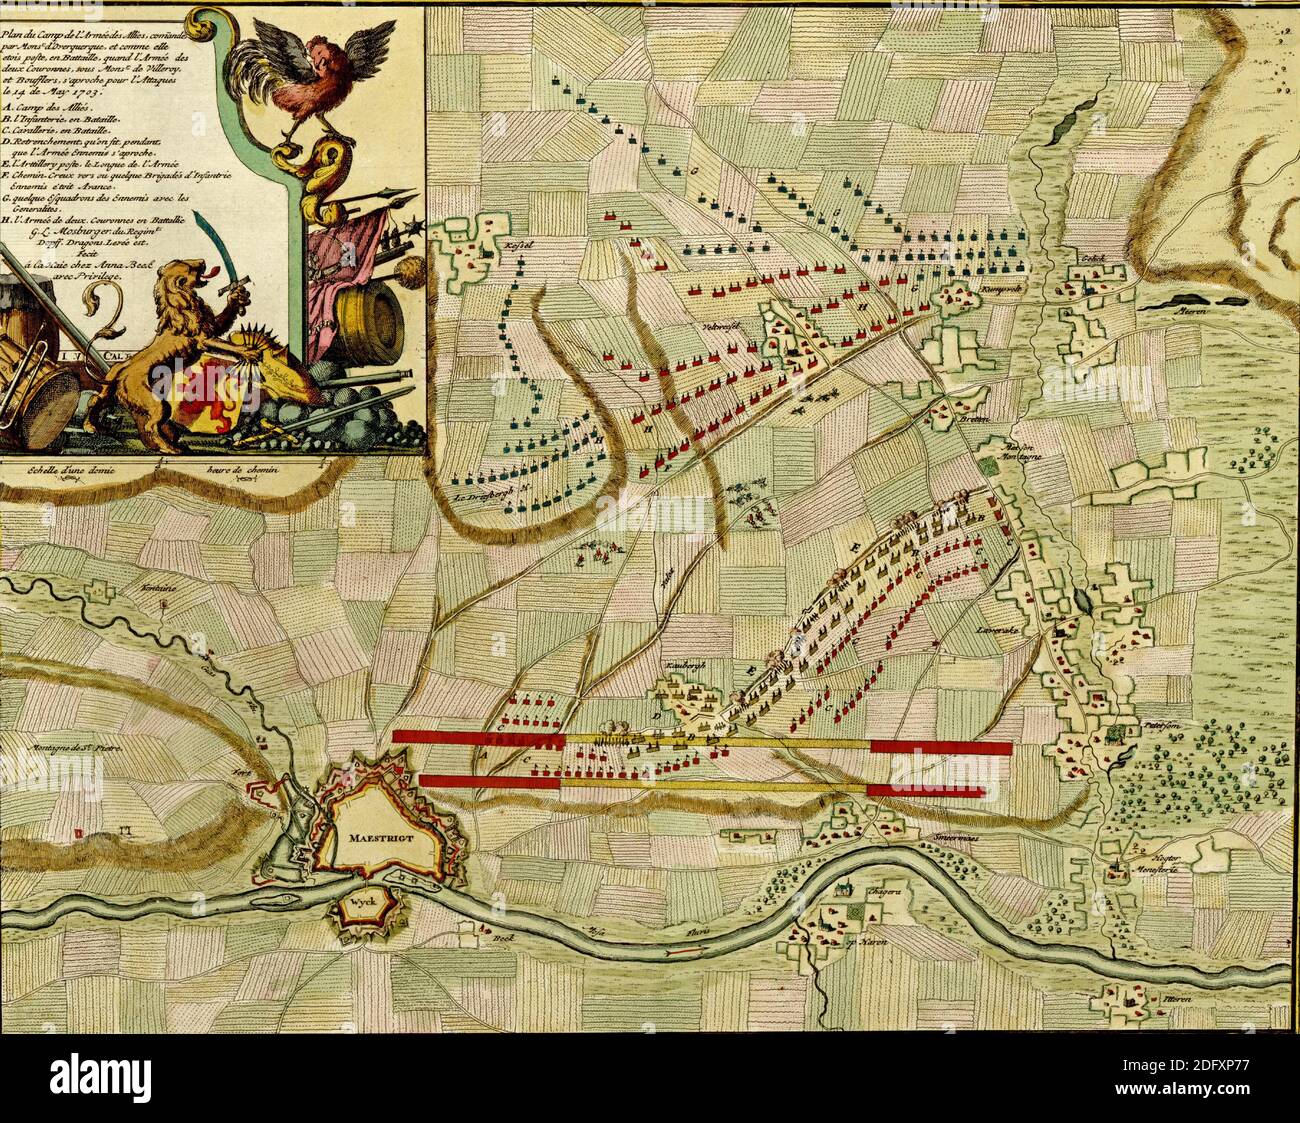 Antique map of battle of Maestrich (Maastricht), 1673,  from the Atlas of fortifications and battles, by Anna Beek and Gaspar Baillieu  Originally pub Stock Photo